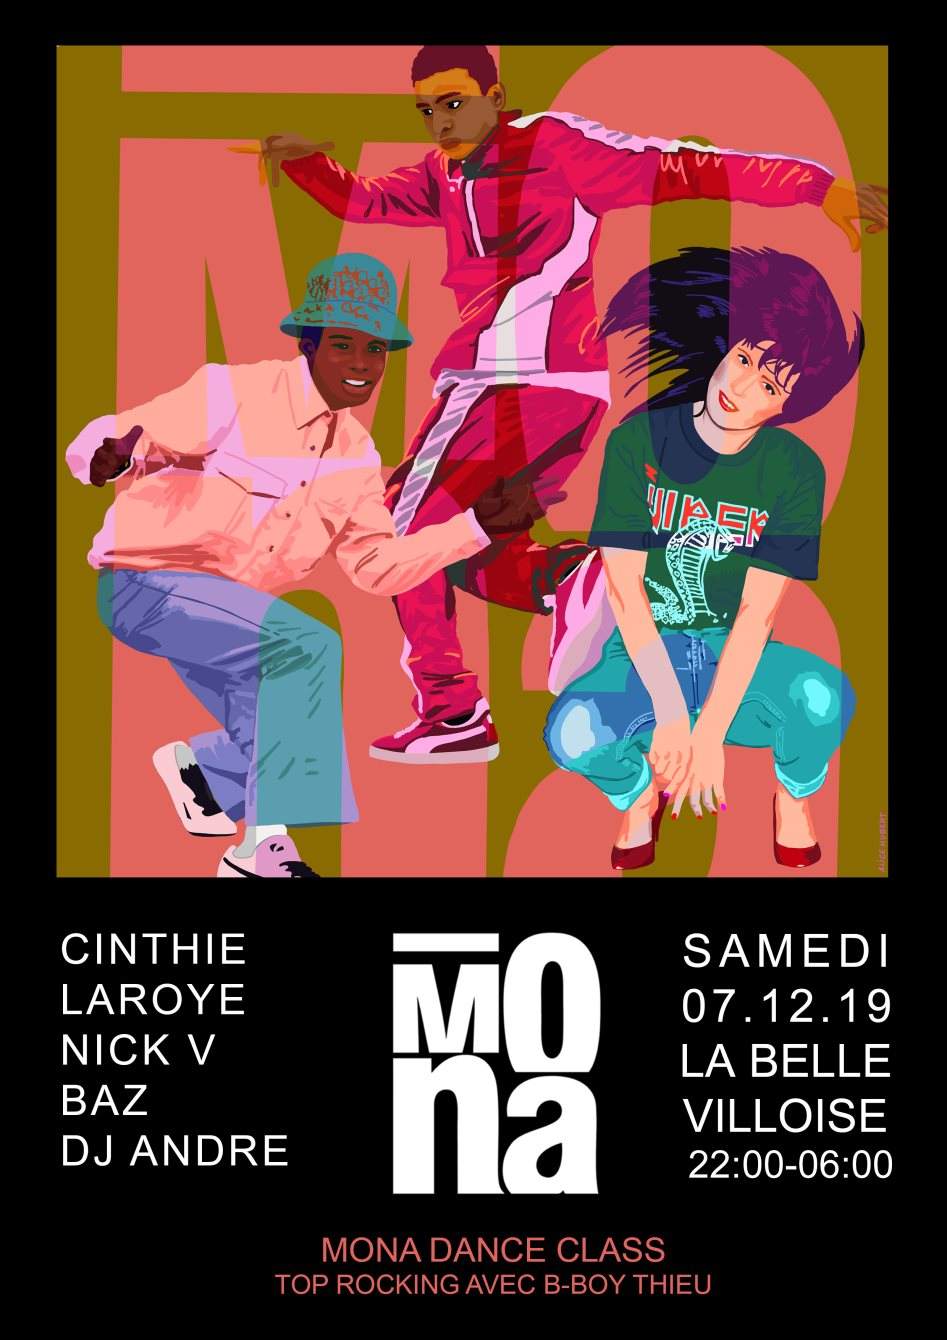 Mona with Cinthie Laroye Nick V André Baz & Dance Class - フライヤー裏